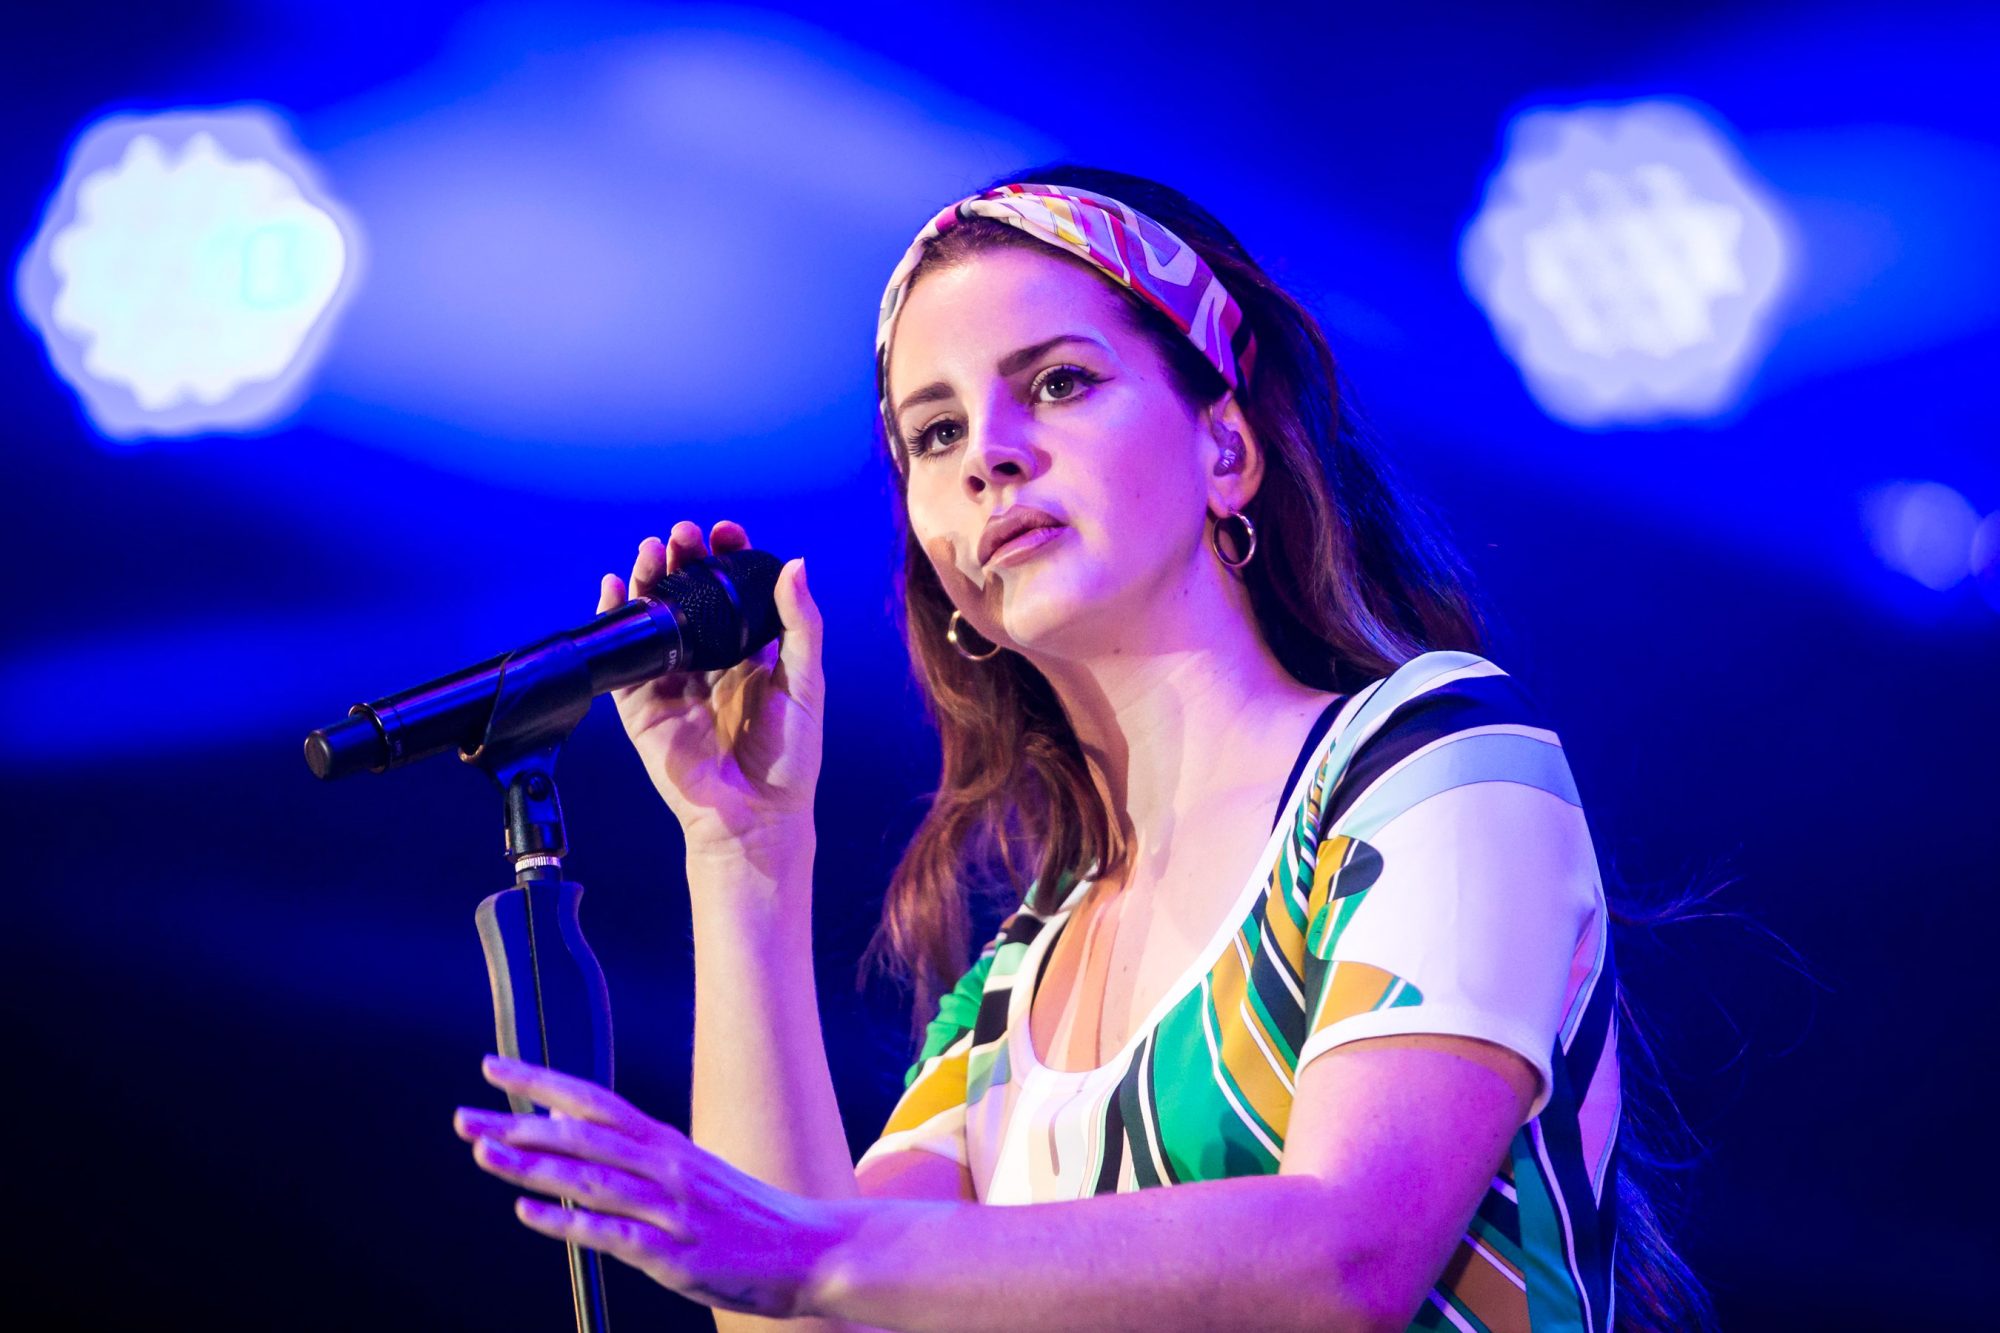 Lana Del Rey clarifies comments about Trump's role in Capitol riots 'It's not the point'